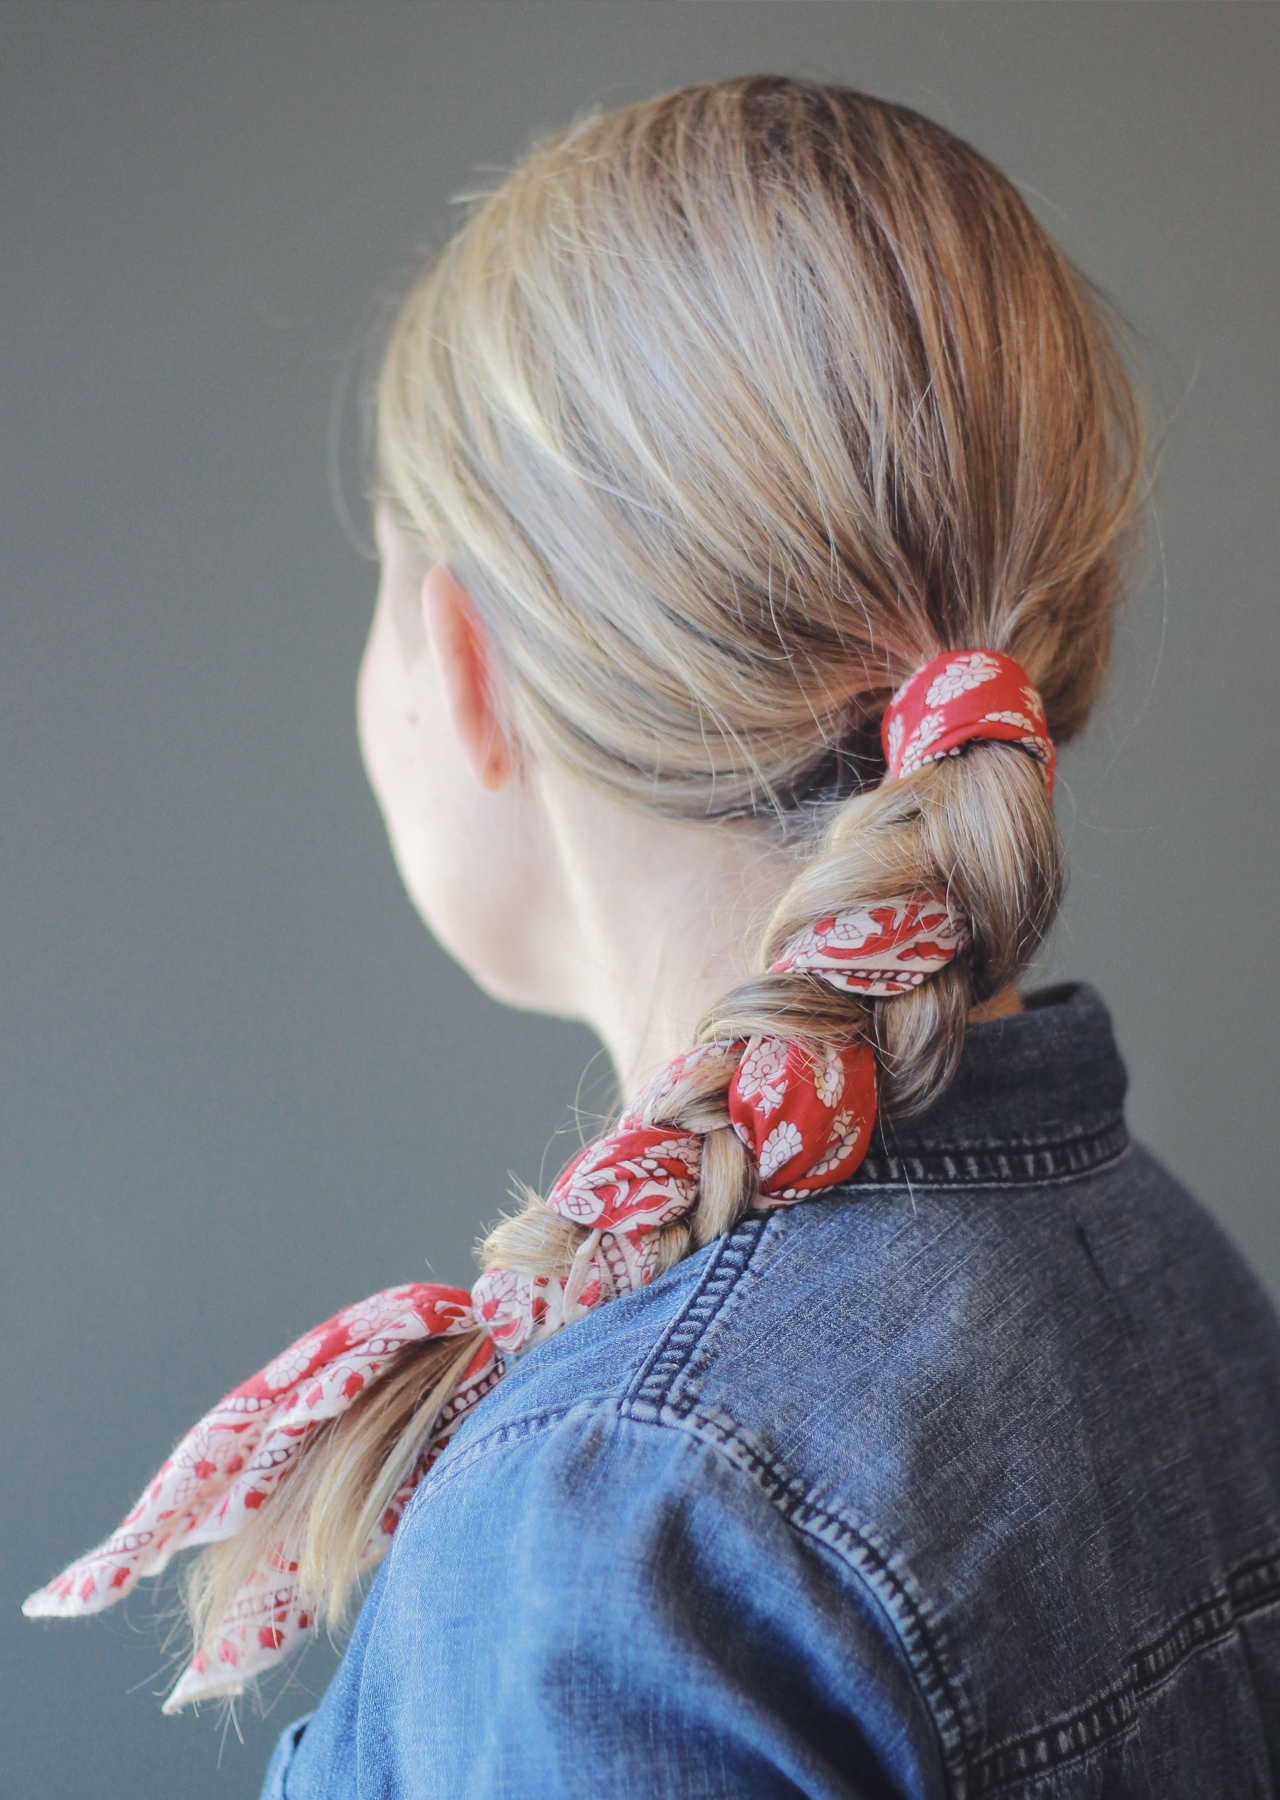 The Steele Maiden: 3 New Ways to Wear a Hair Scarf this Fall